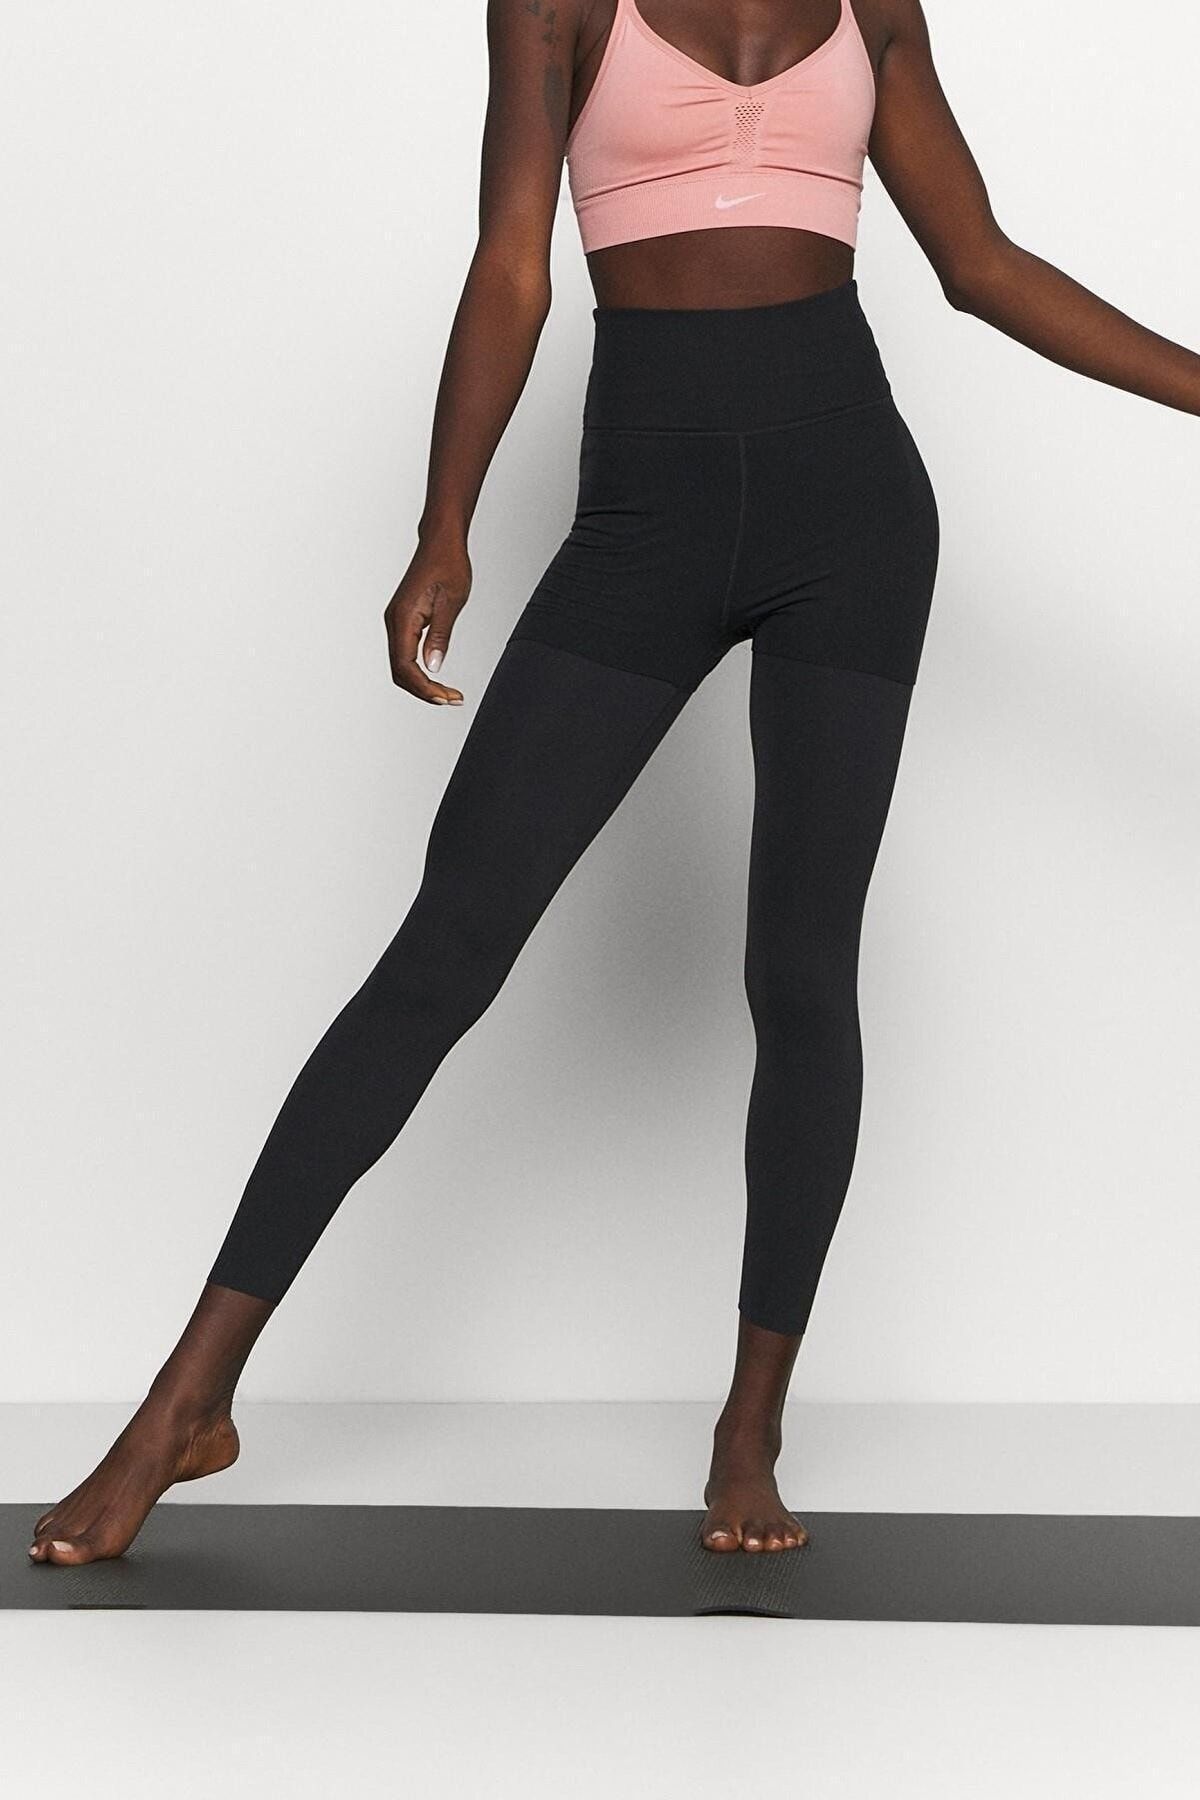 Nike Yoga Luxe Layered High-waisted 7/8 Tights - High Waisted Black Tights